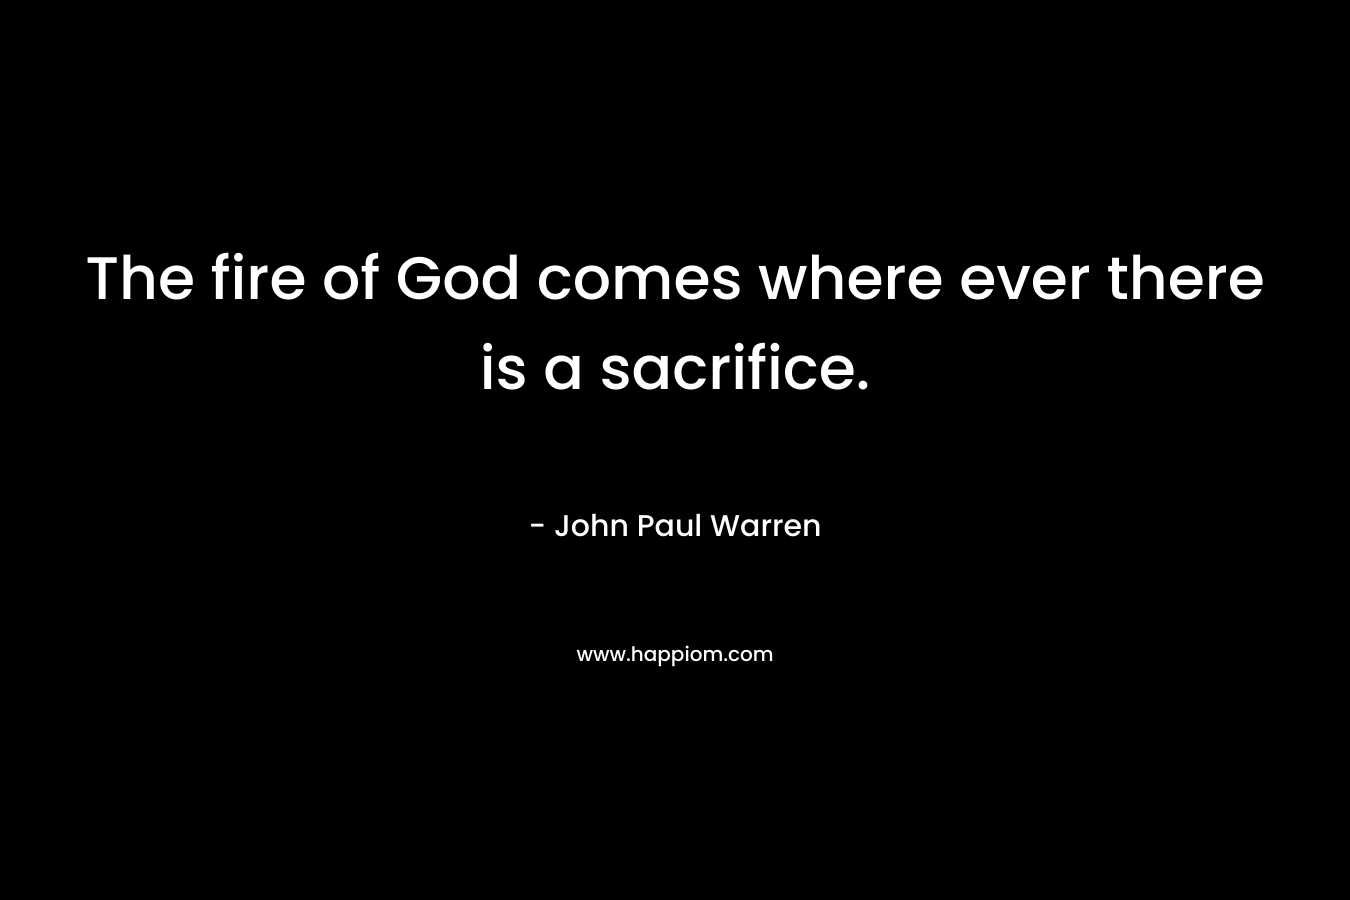 The fire of God comes where ever there is a sacrifice.